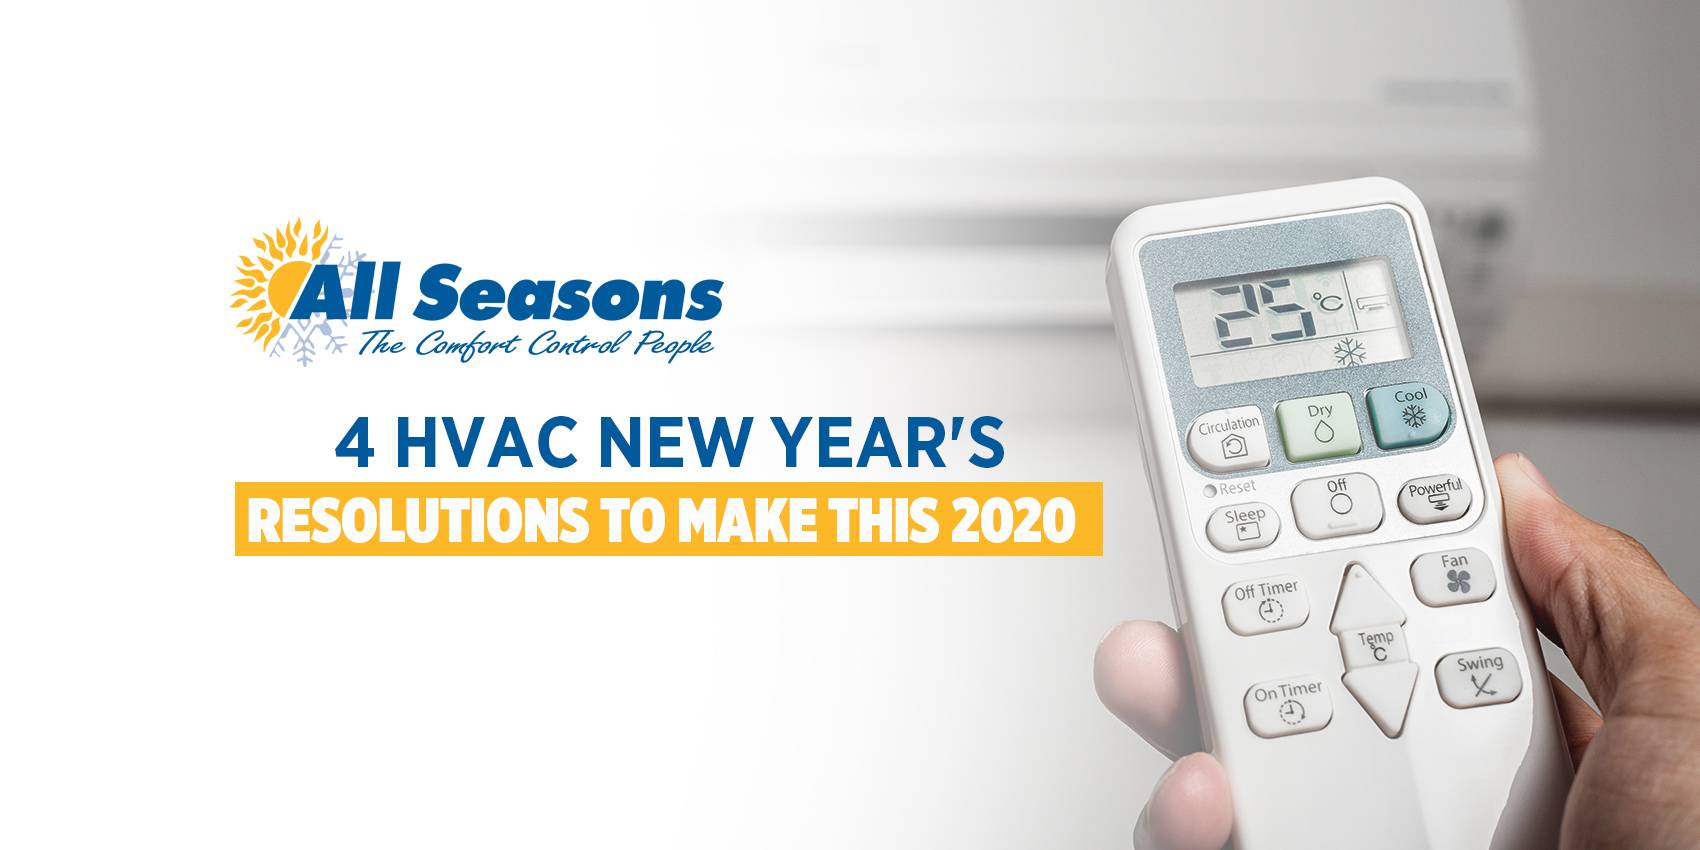 4 HVAC New Year's Resolutions to Make This 2020